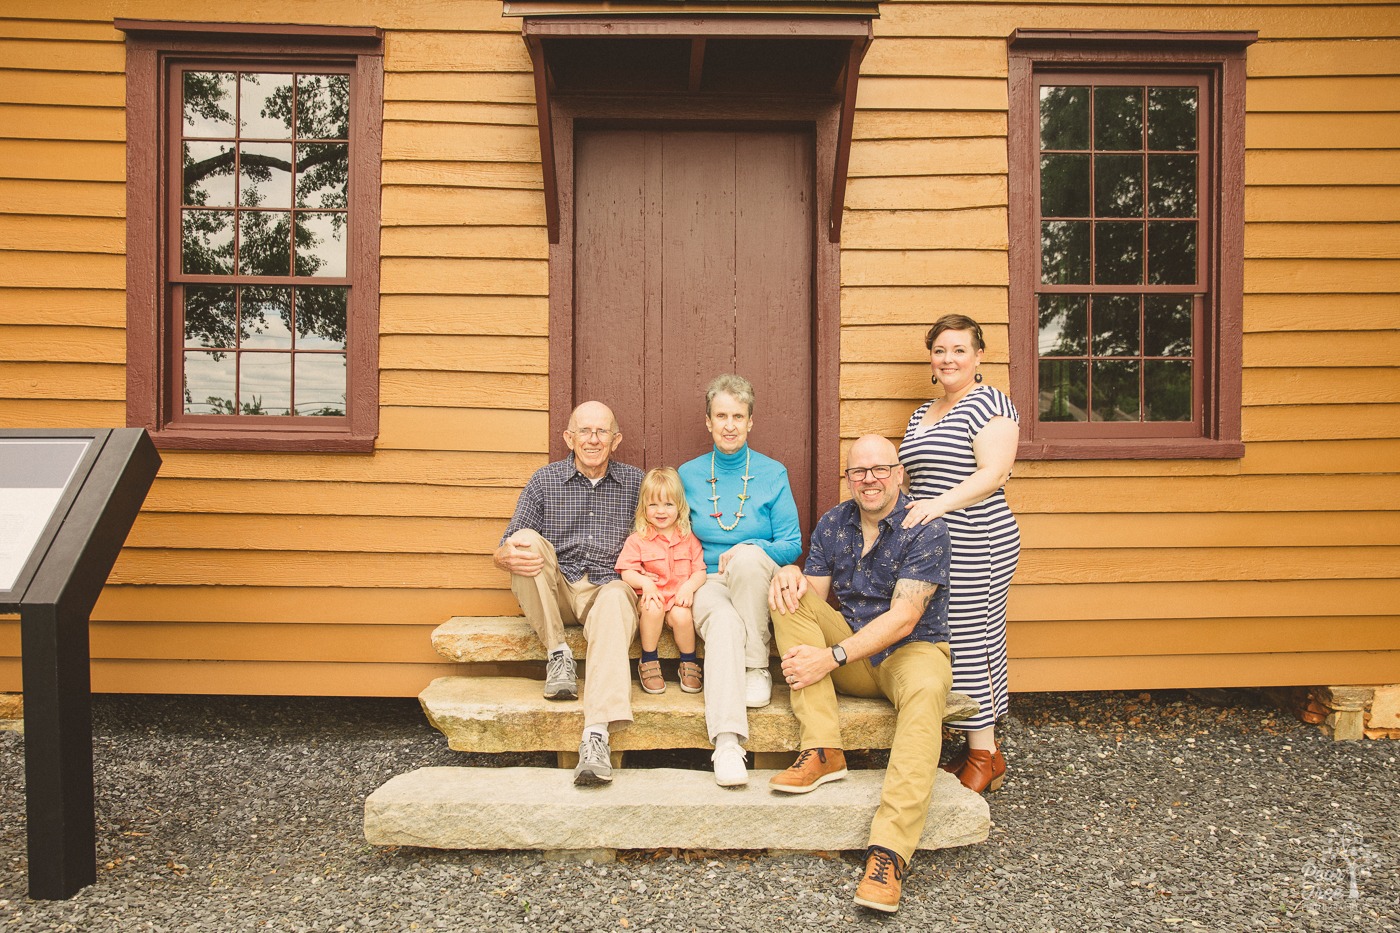 Multi-generational family photo with toddler, his parents, and the grandparents smiling on front stone steps